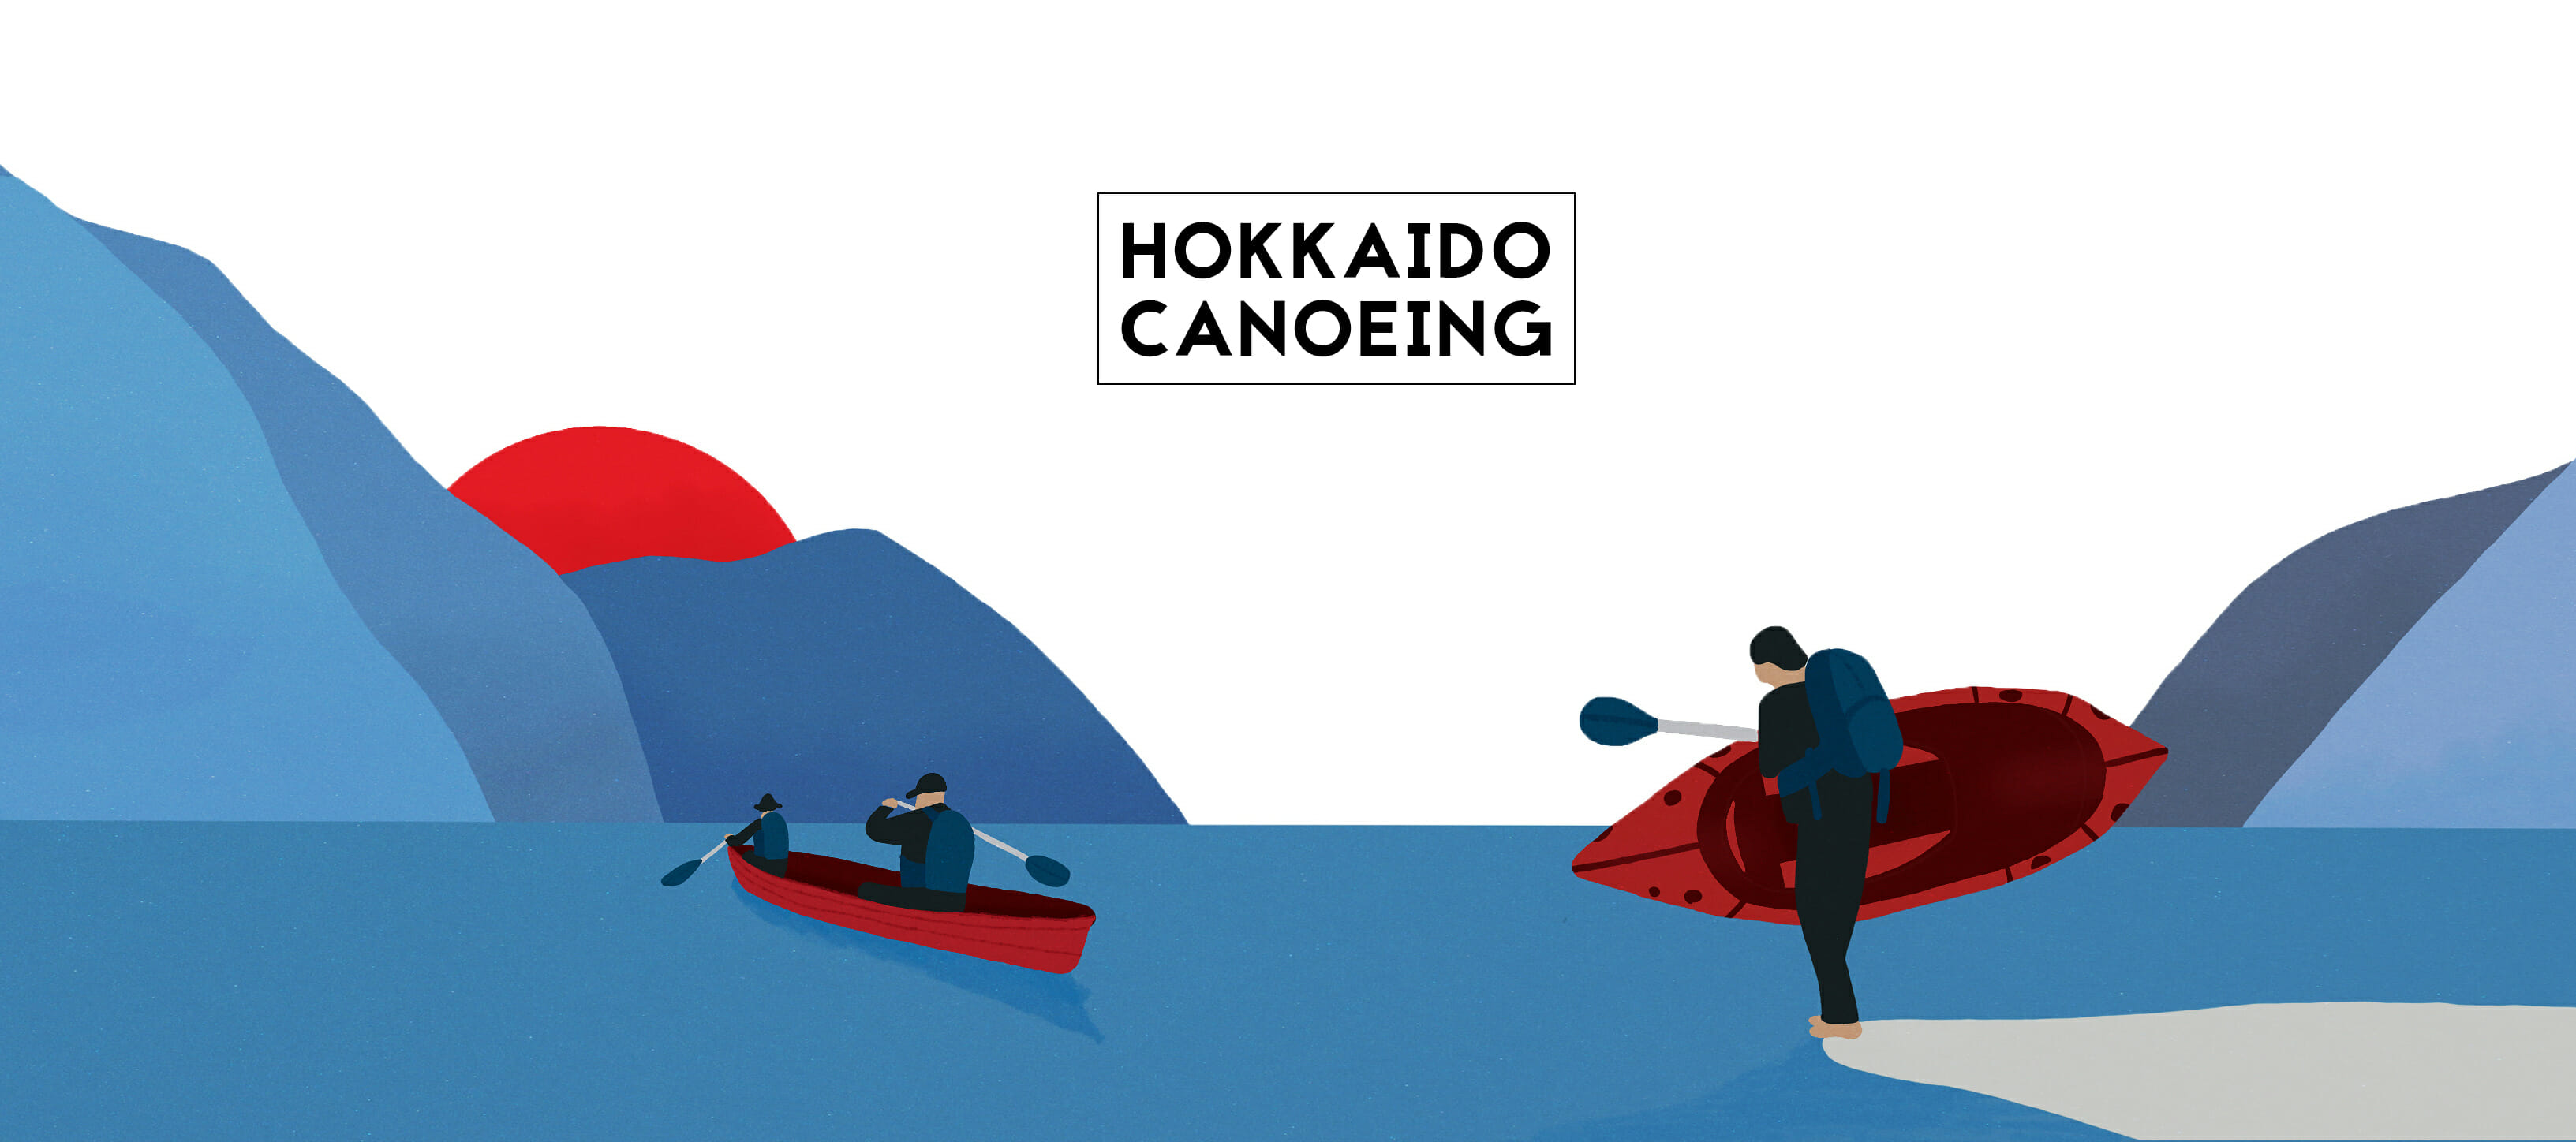 Hokkaido Canoe Touring and Tripping Routes